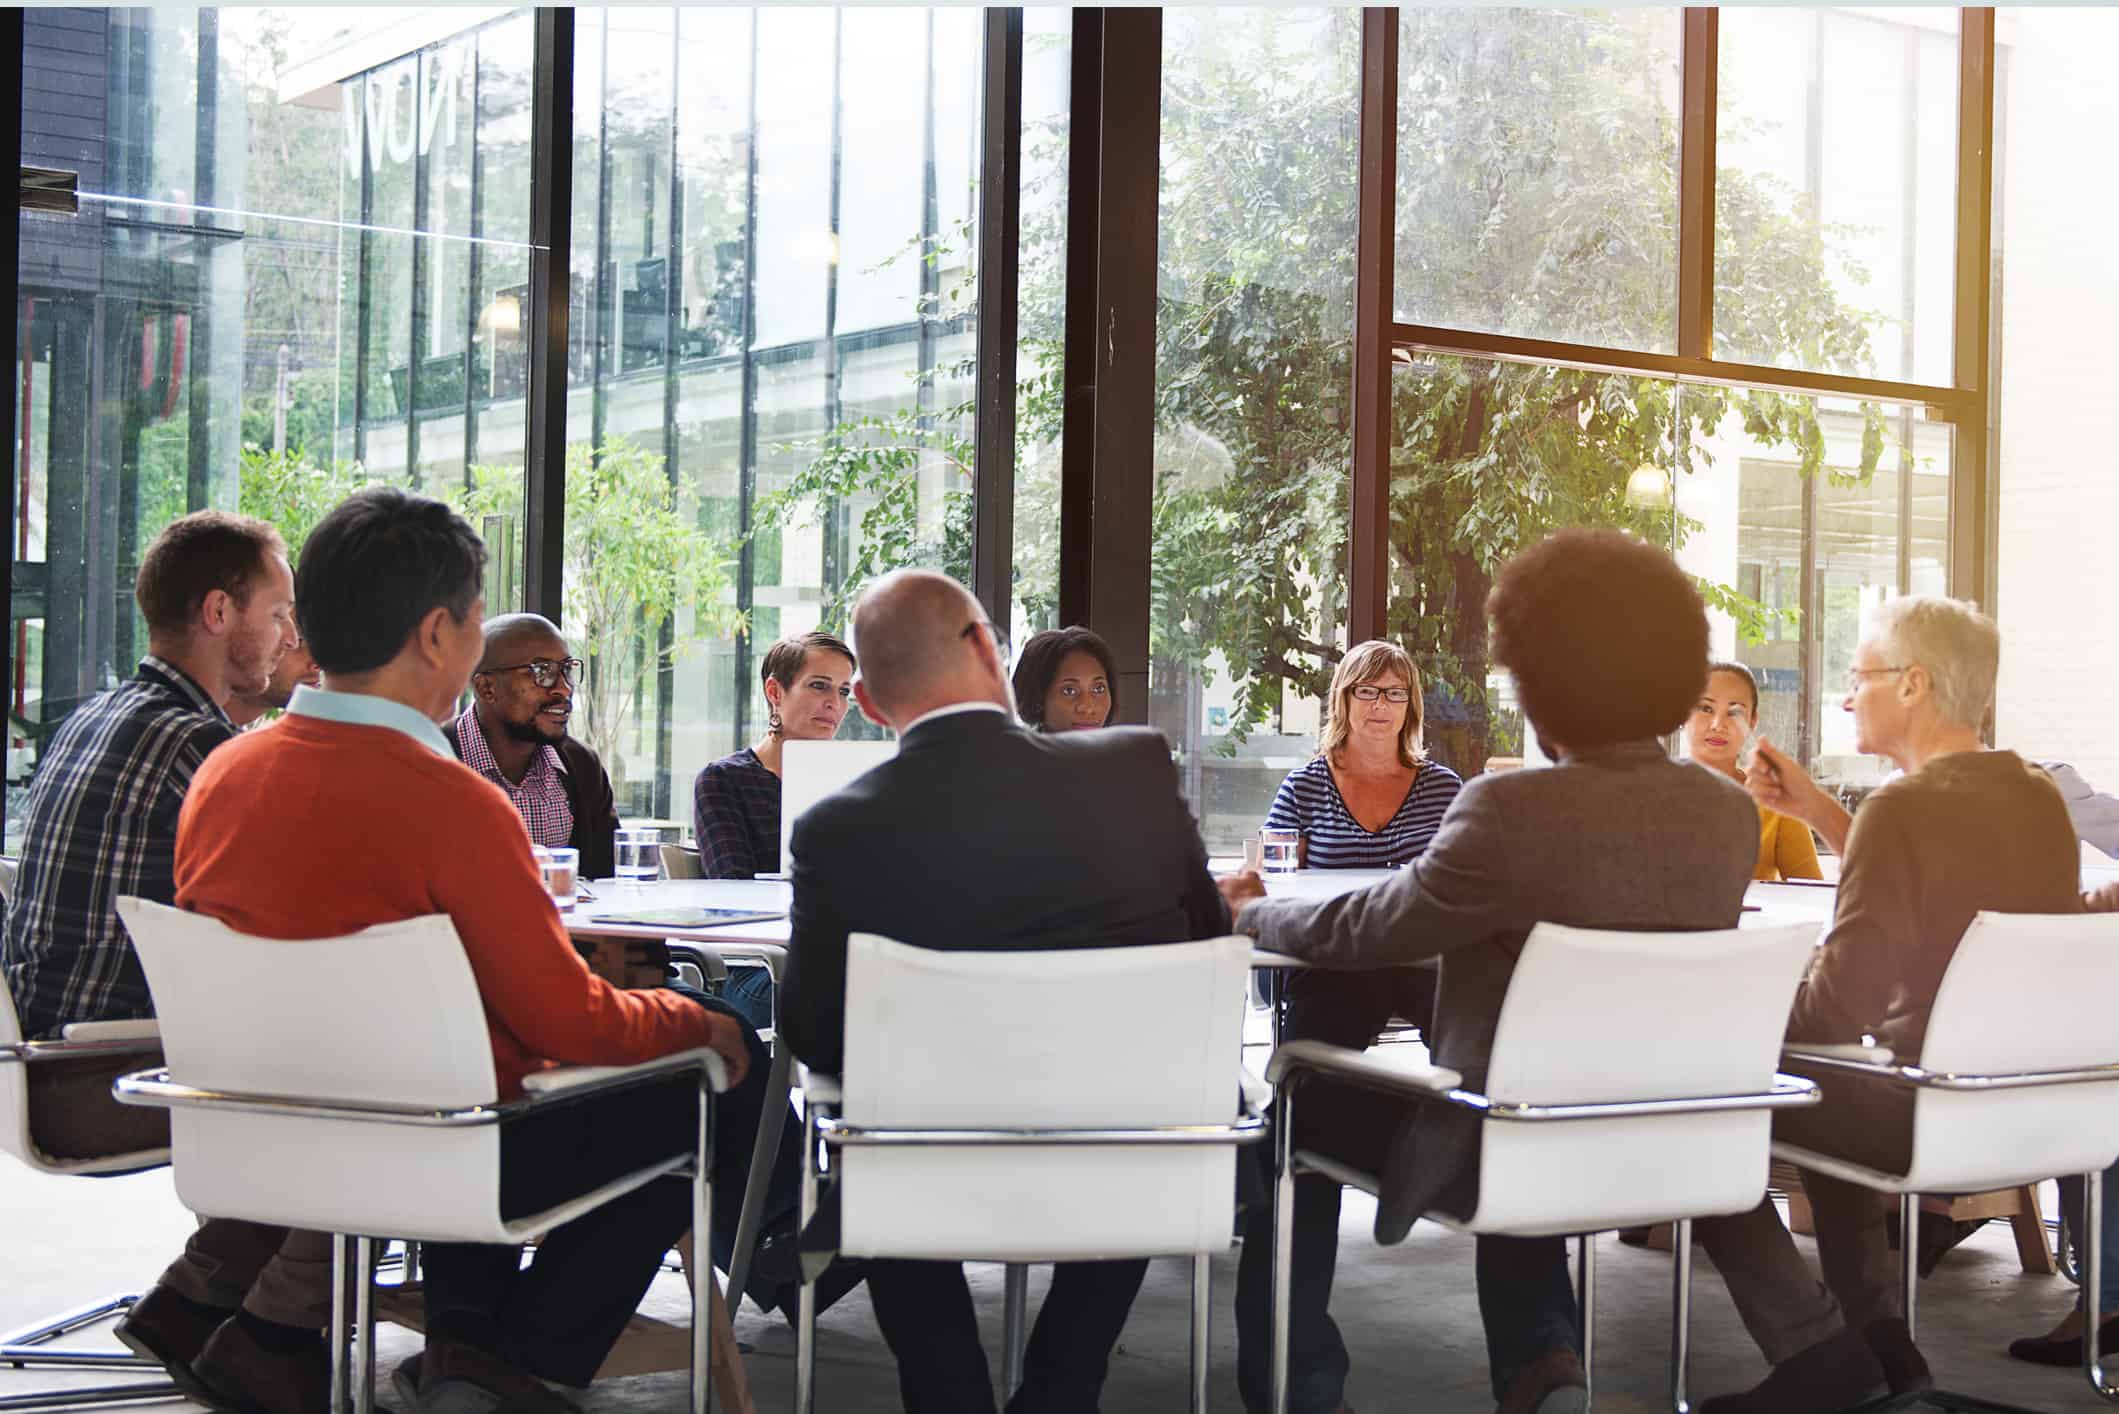 A group of people having a meeting inside a glass-walled conference room